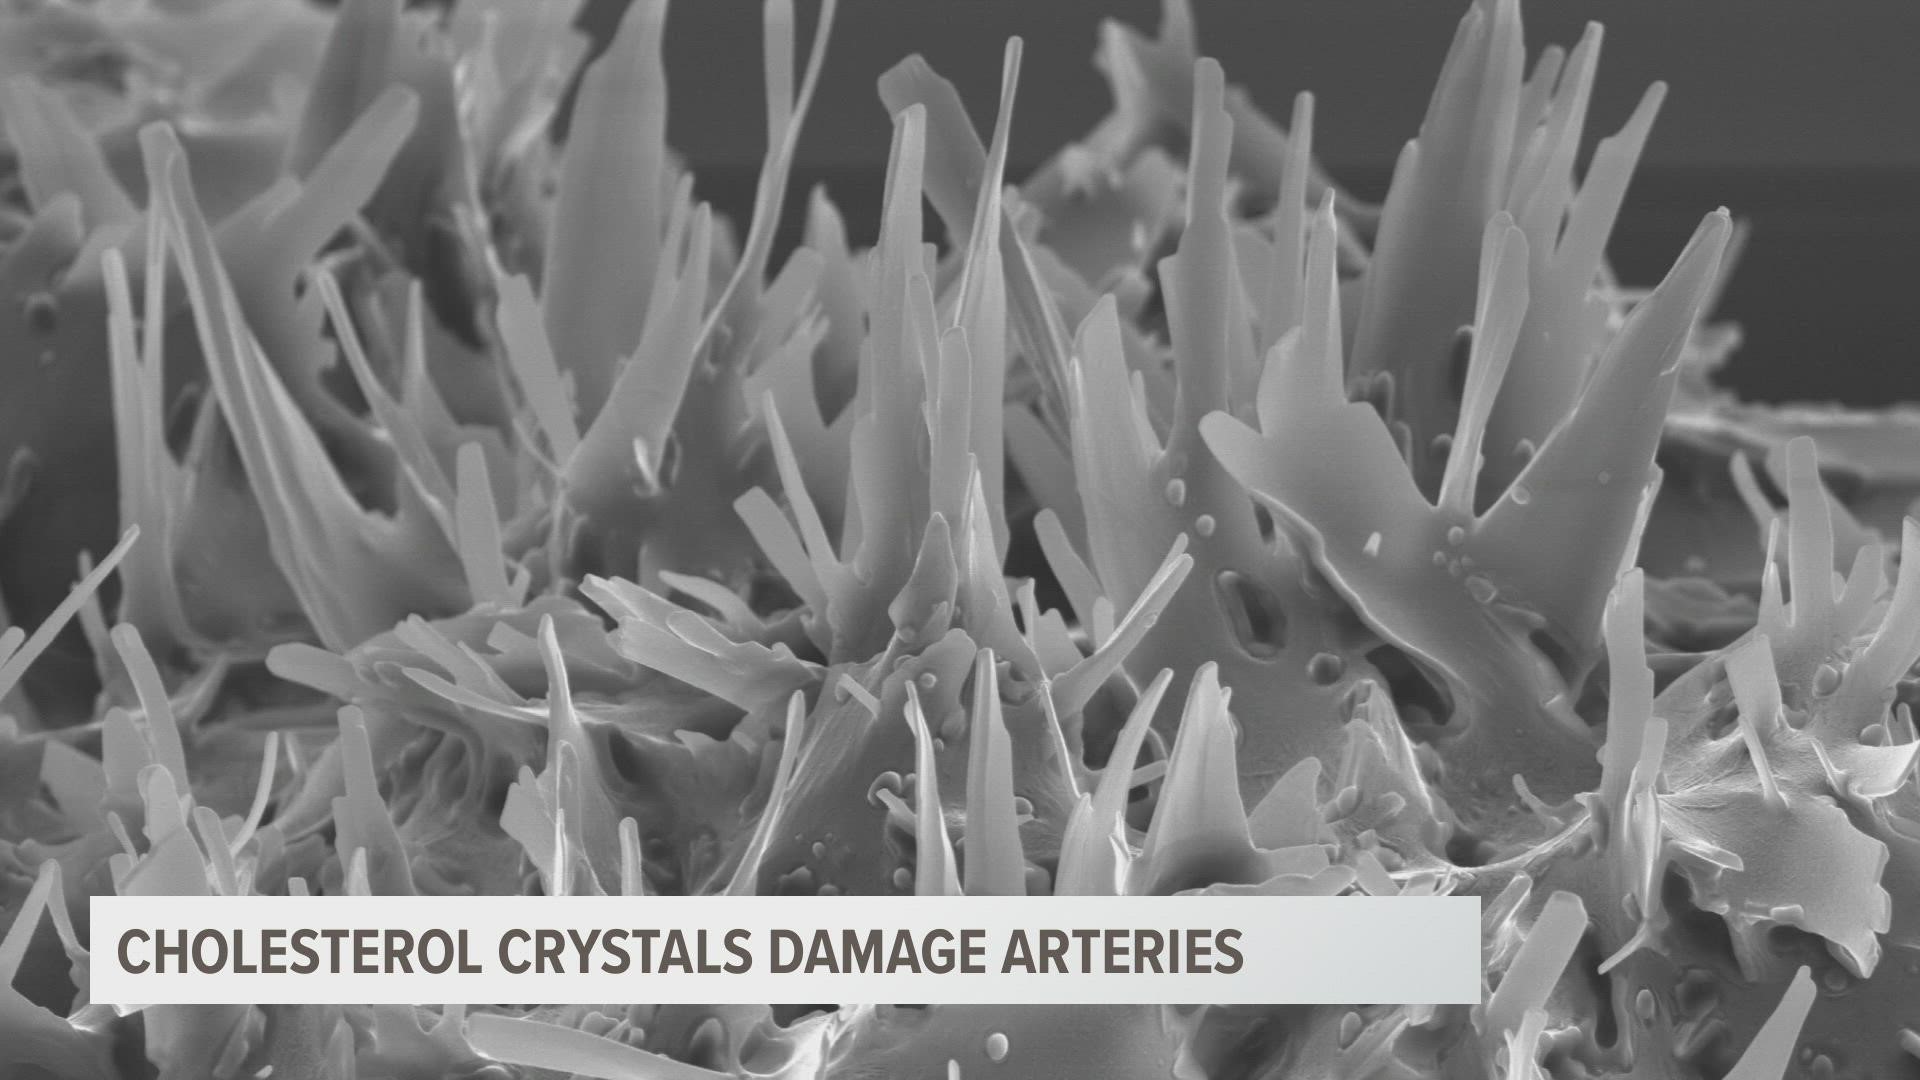 Cholesterol crystals sharp as needles can tear through arteries prior to a heart attack.